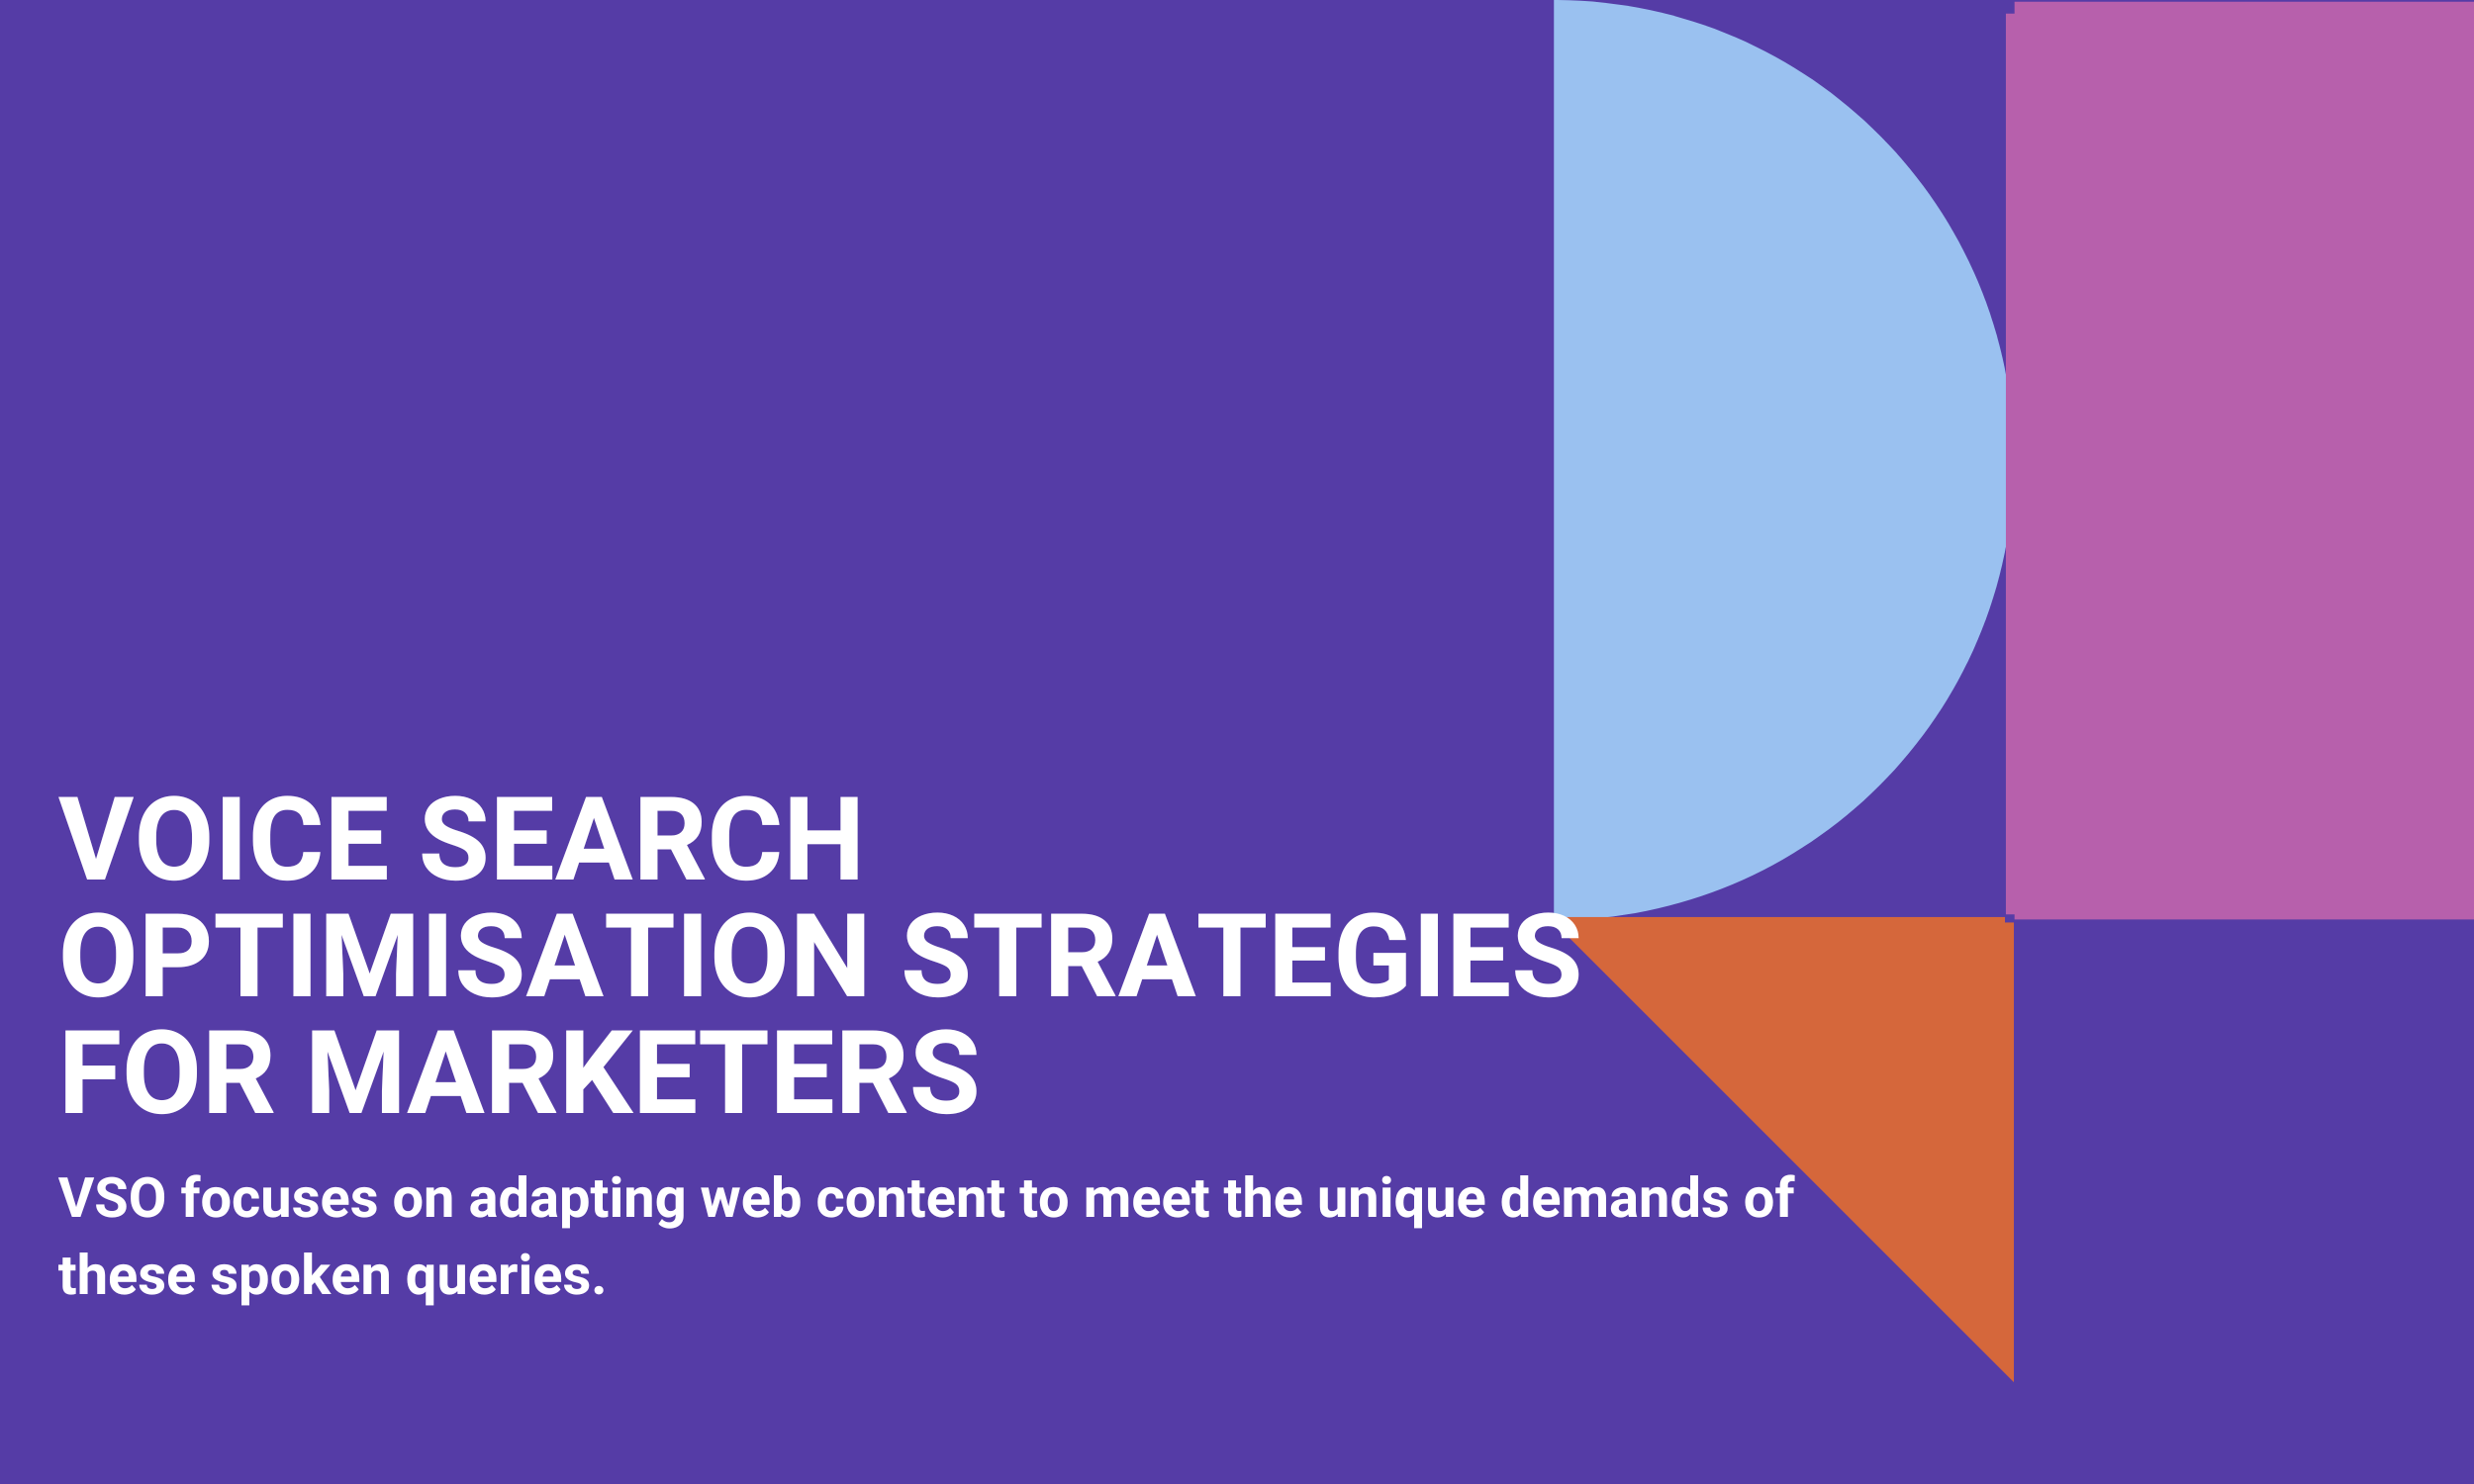 Voice Search Optimisation Strategies for Marketers